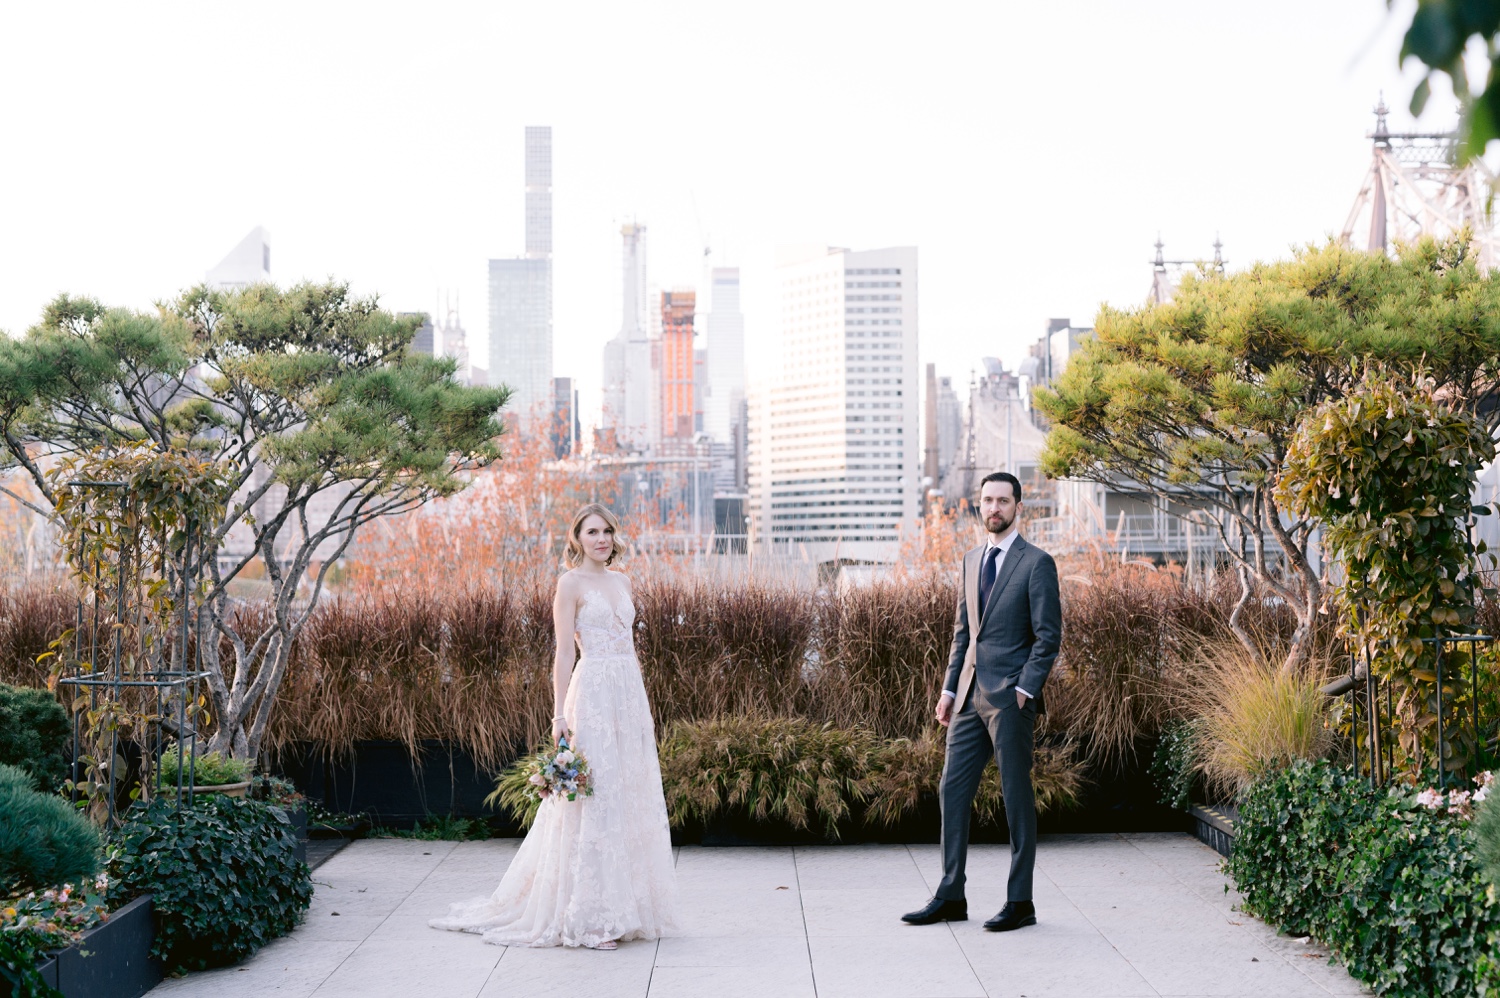 Portraits of a wedding couple at The Foundry